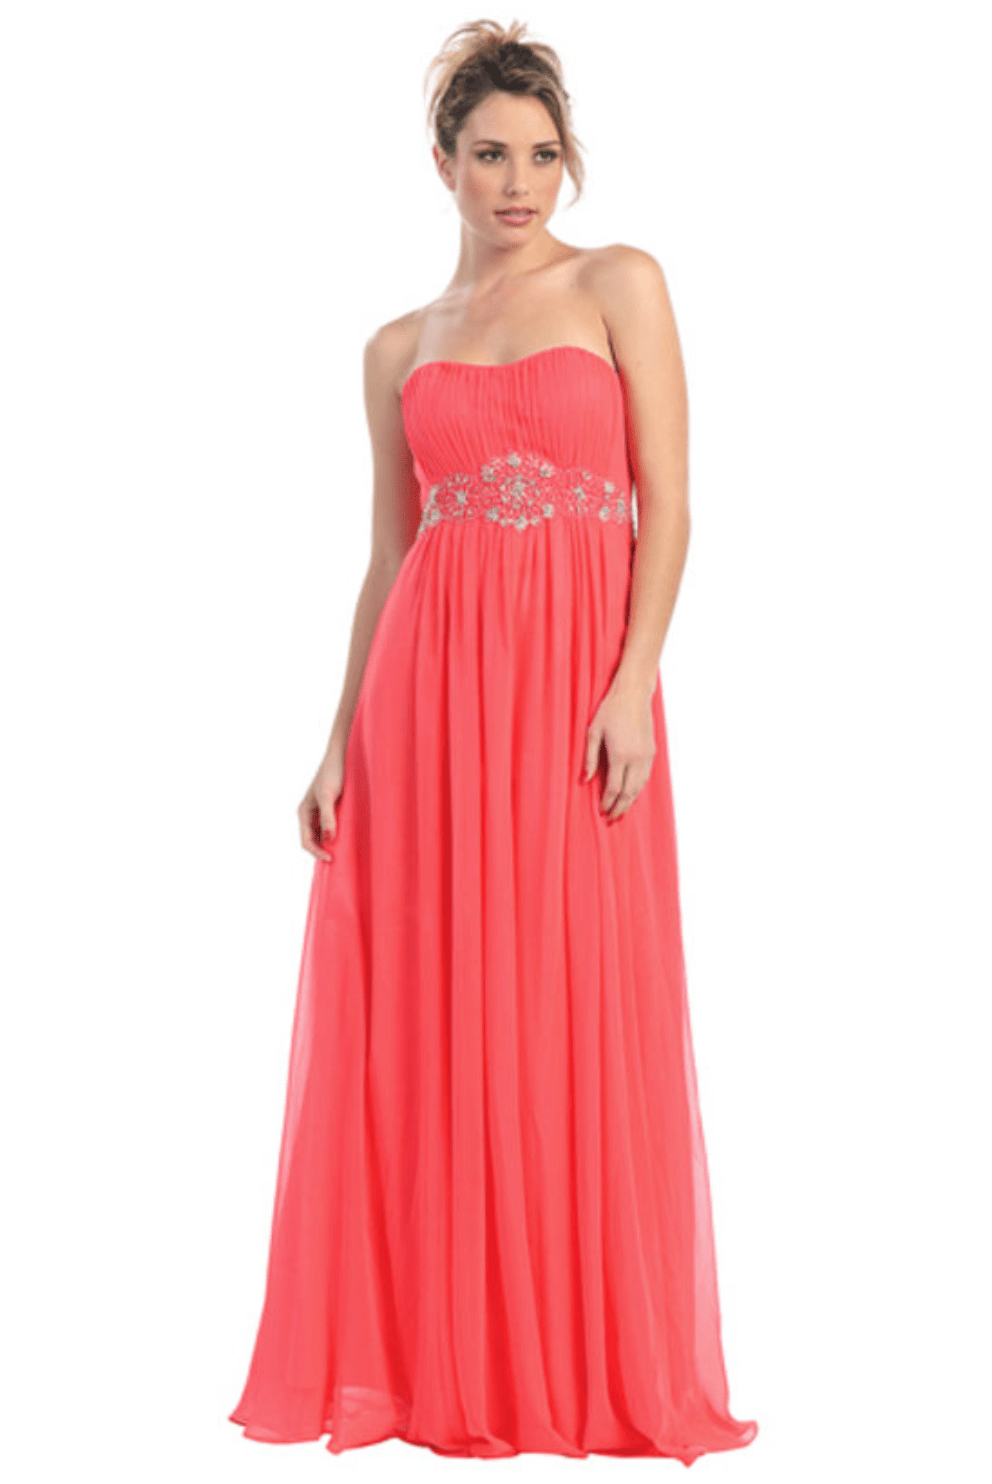 Strapless Flowing Chiffon Dress by Fiesta | 11 Colors - NORMA REED